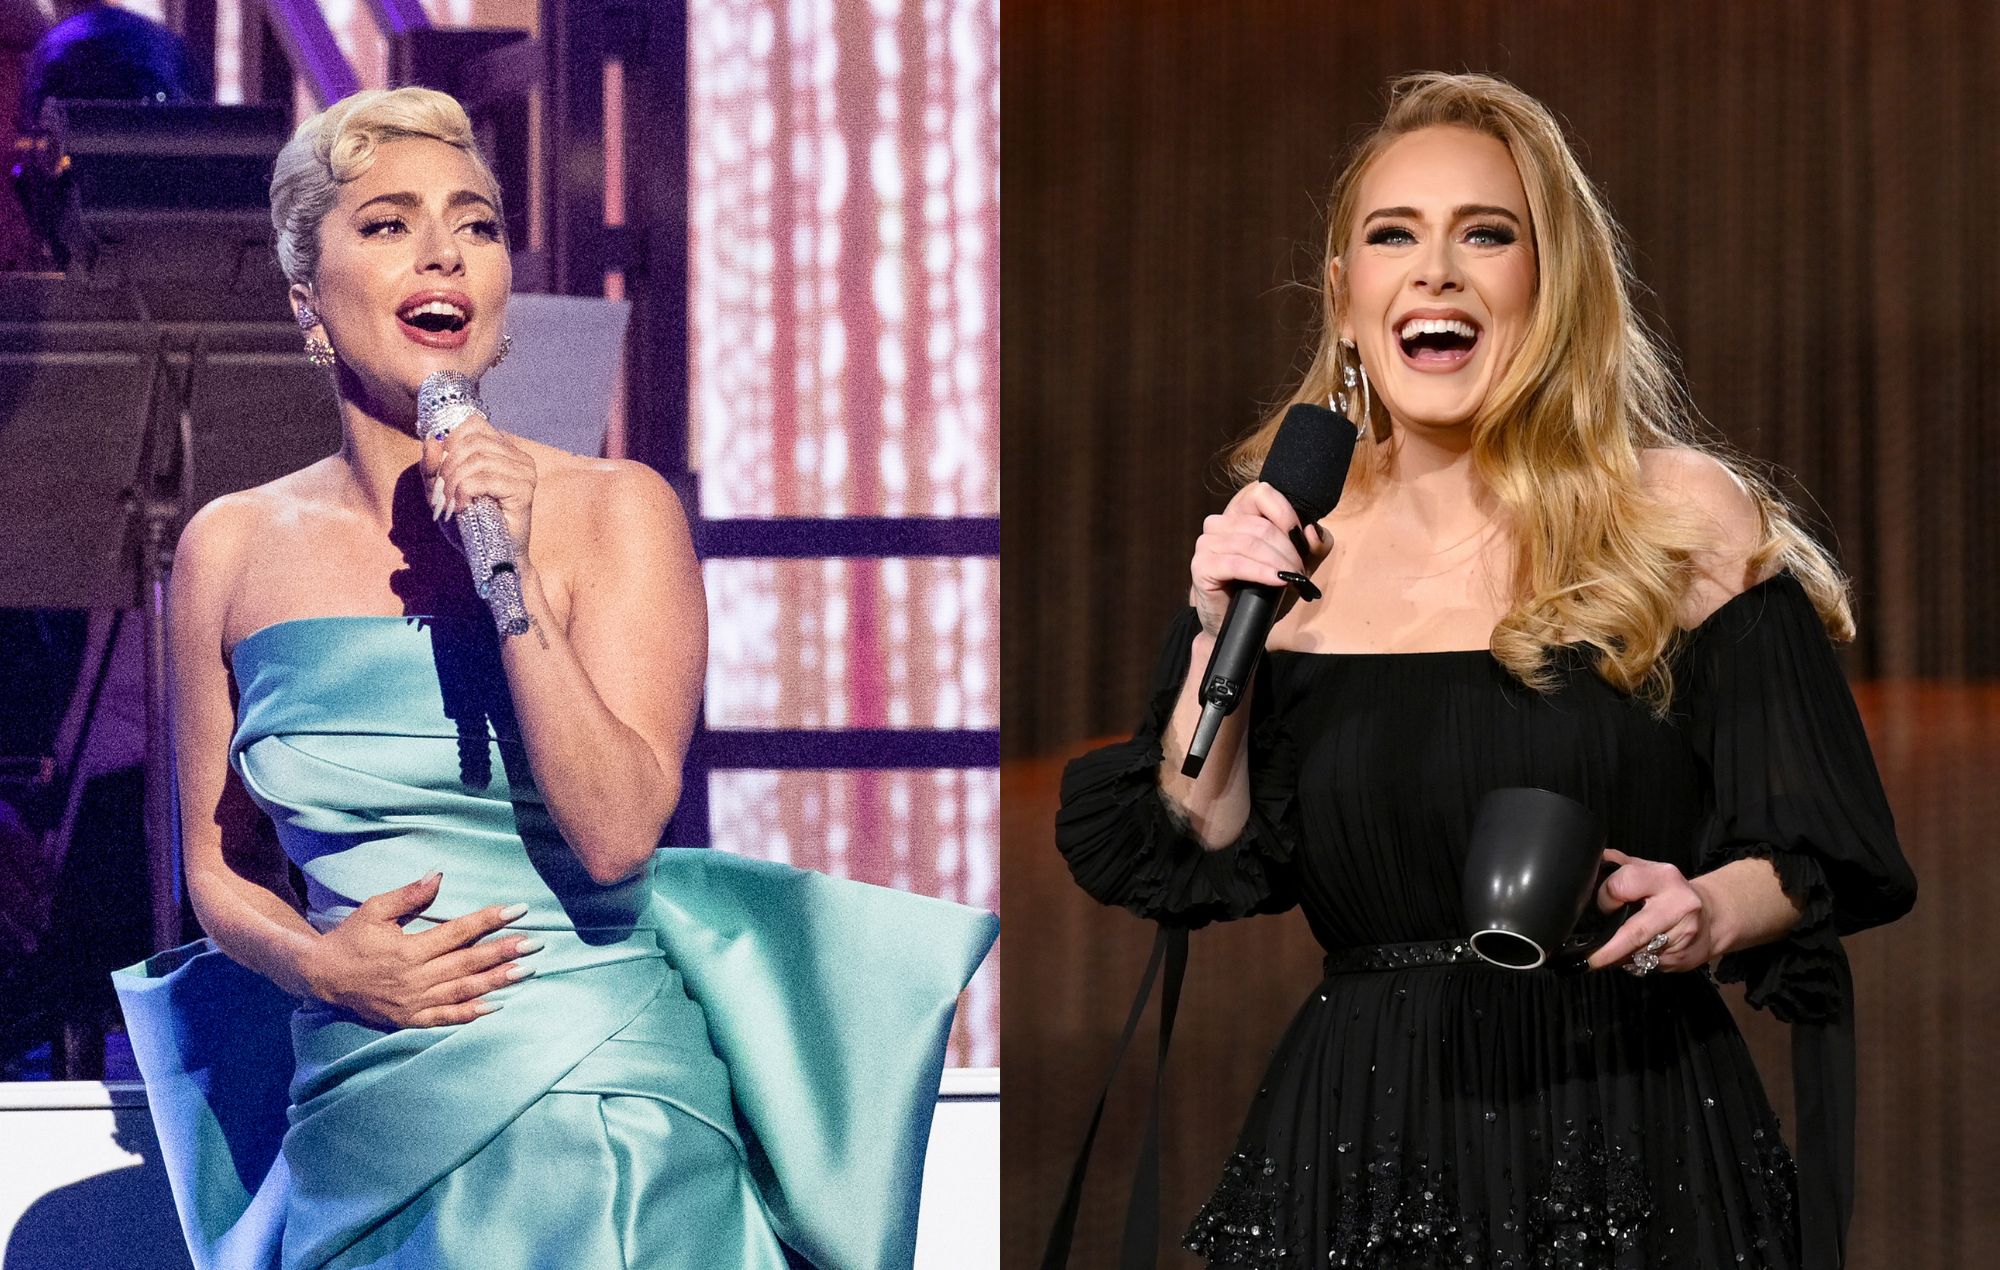 Adele recalls how nervous she was when Lady Gaga came to see her perform